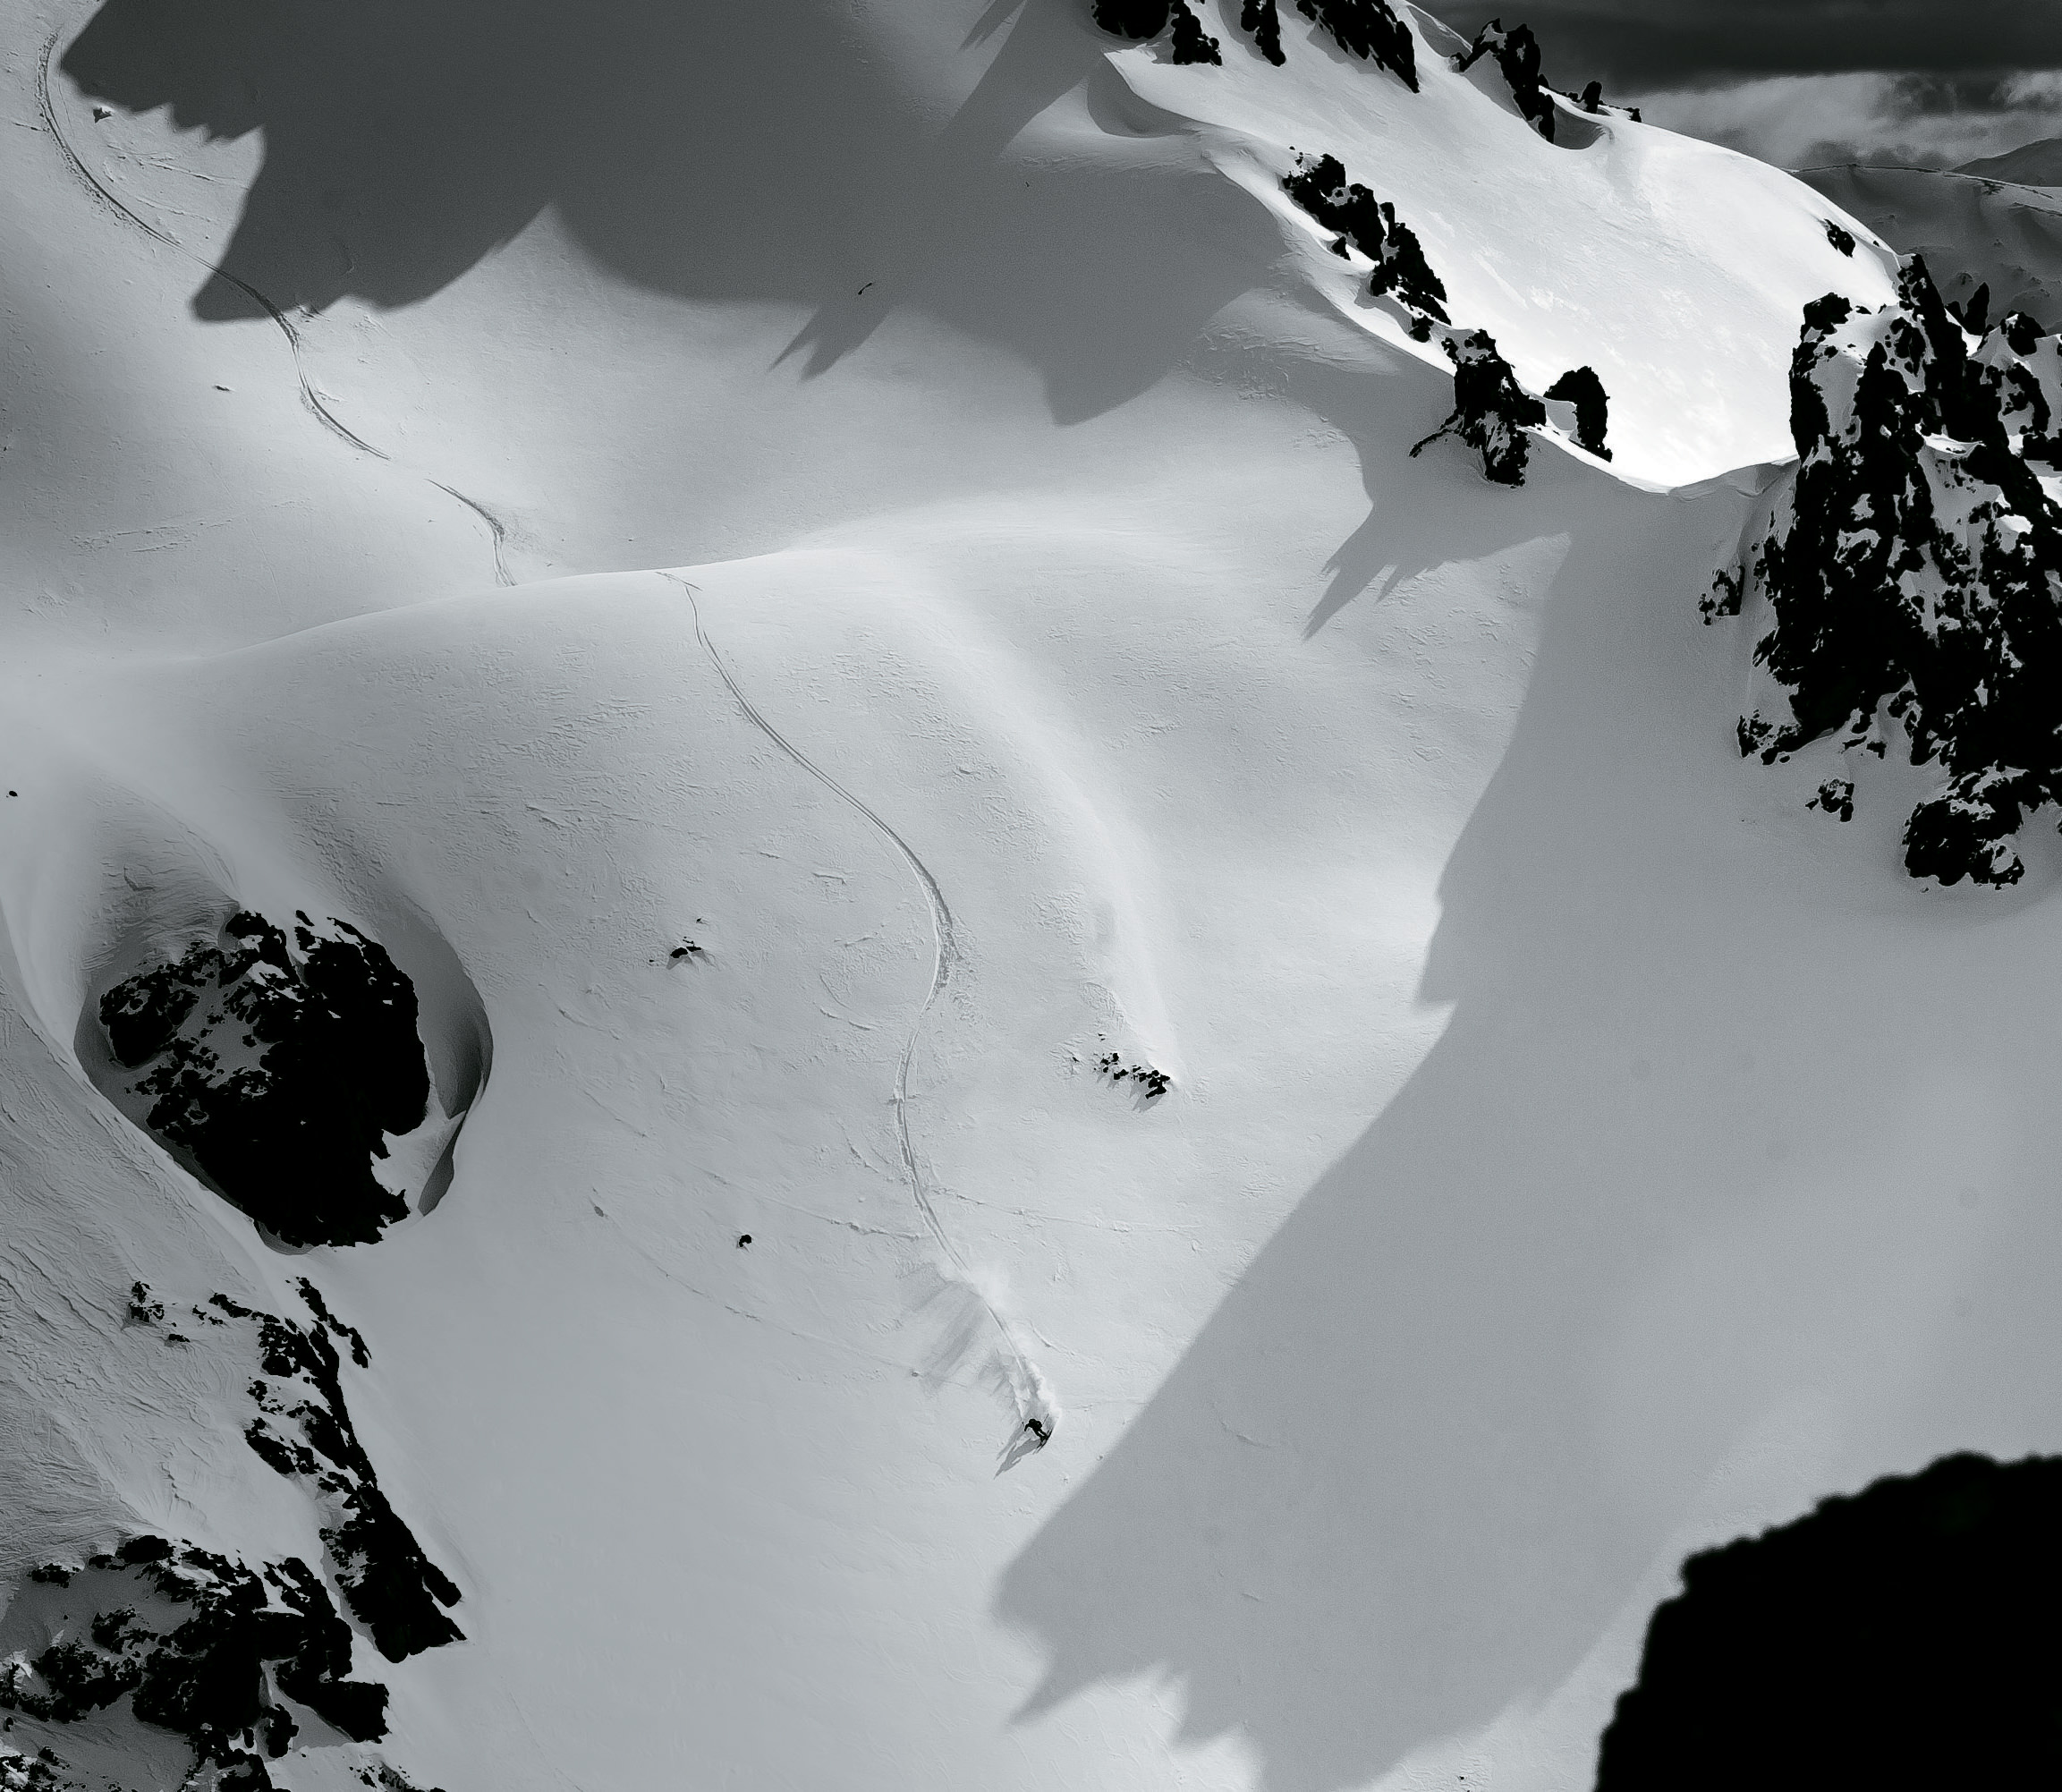 Aerial view of skier on mountain.